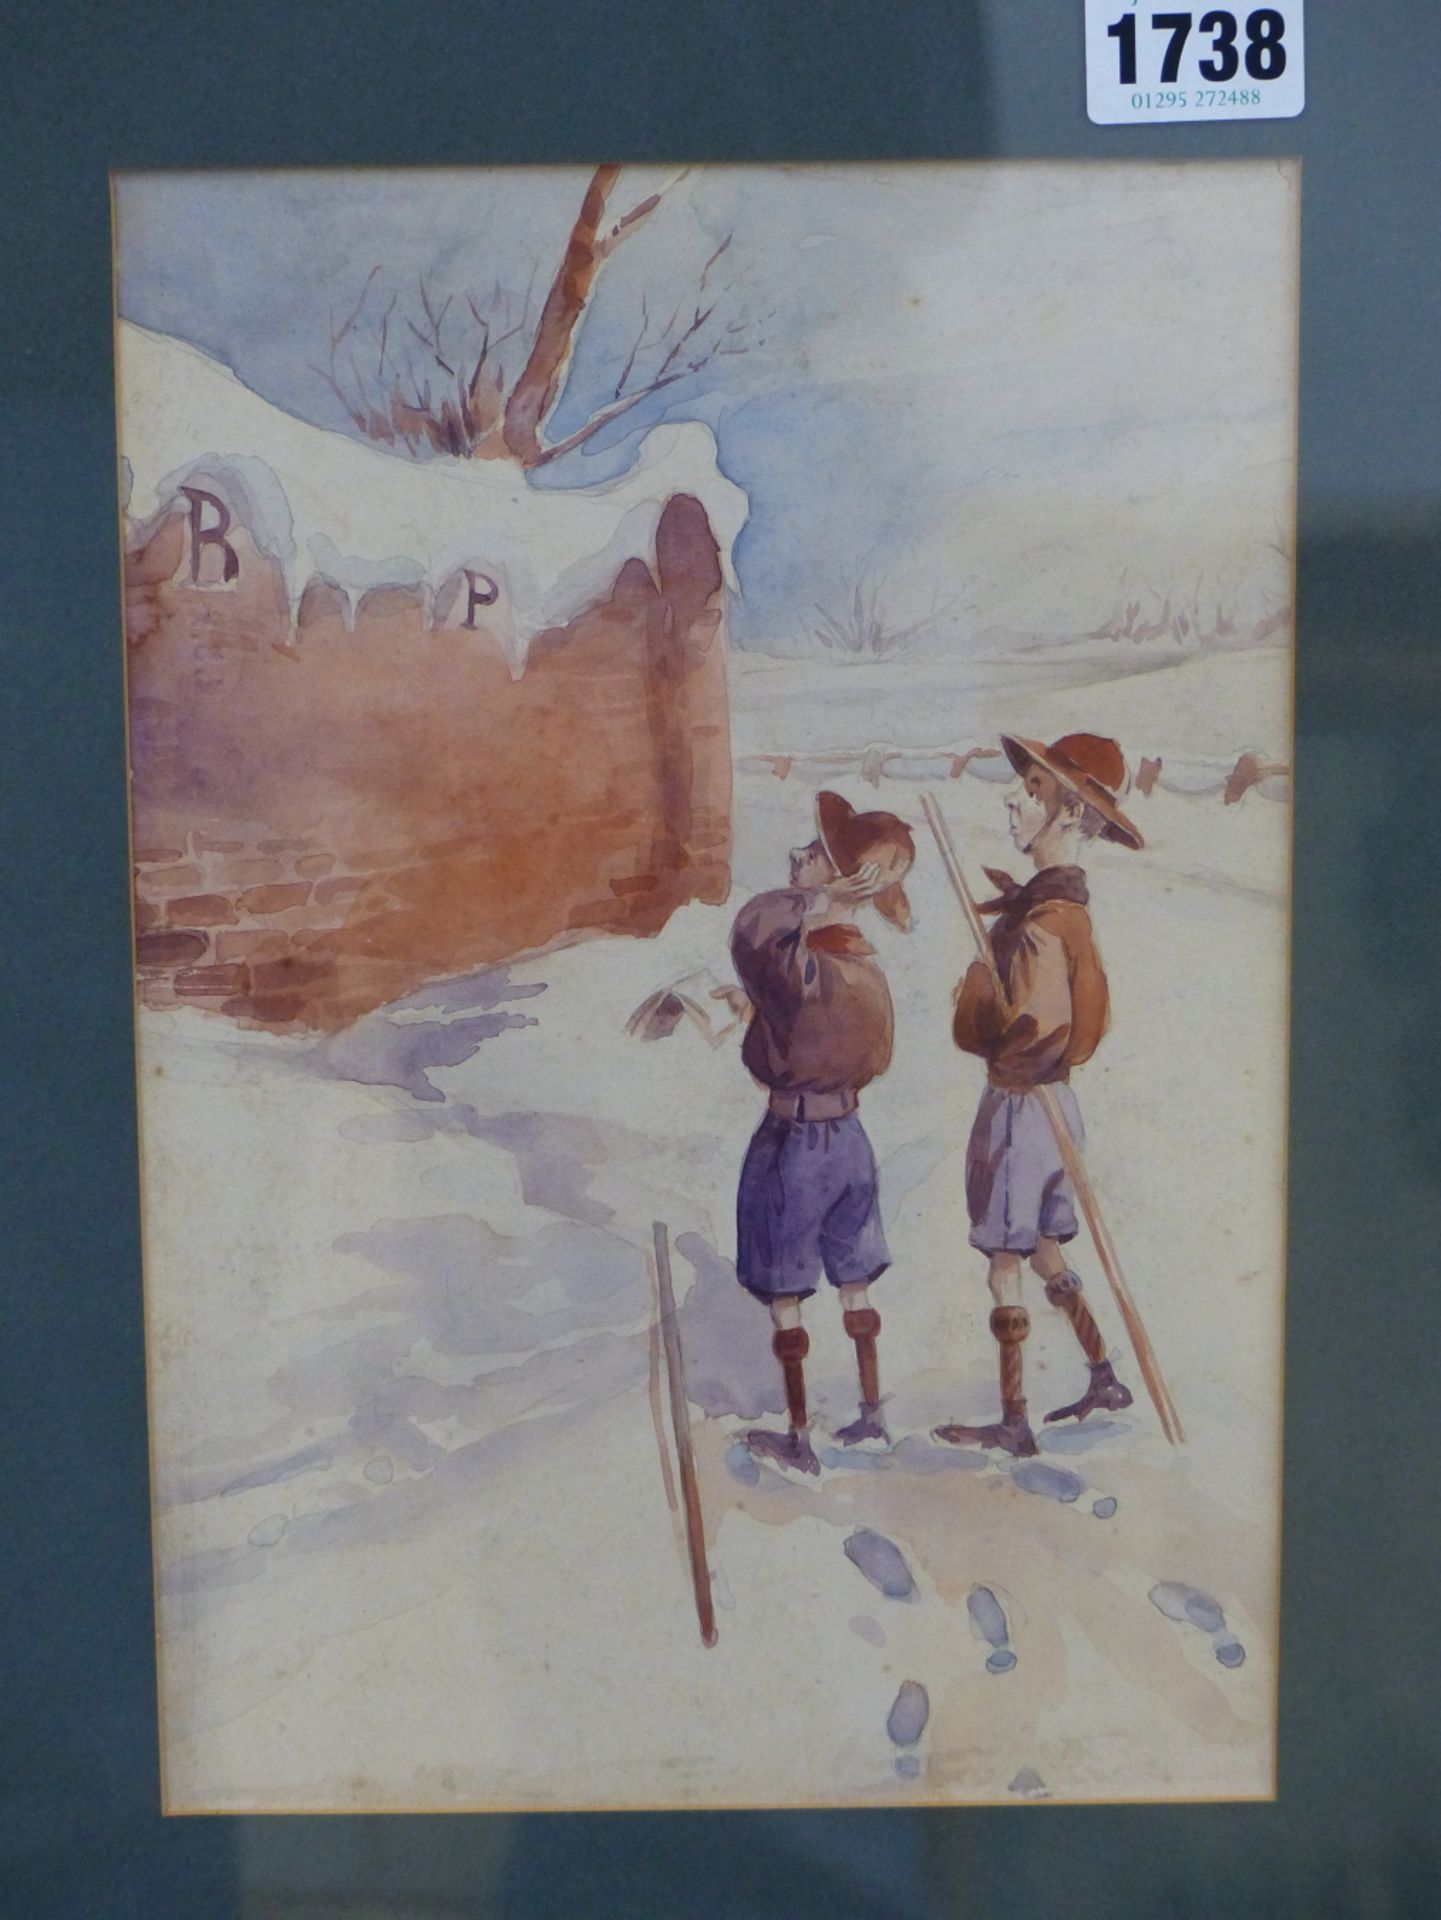 ENGLISH SCHOOL 20TH C. SCOUTING INTEREST. TWO SPINDELY BOY SCOUTS TREKKING IN SNOW PONDER THE - Image 2 of 3